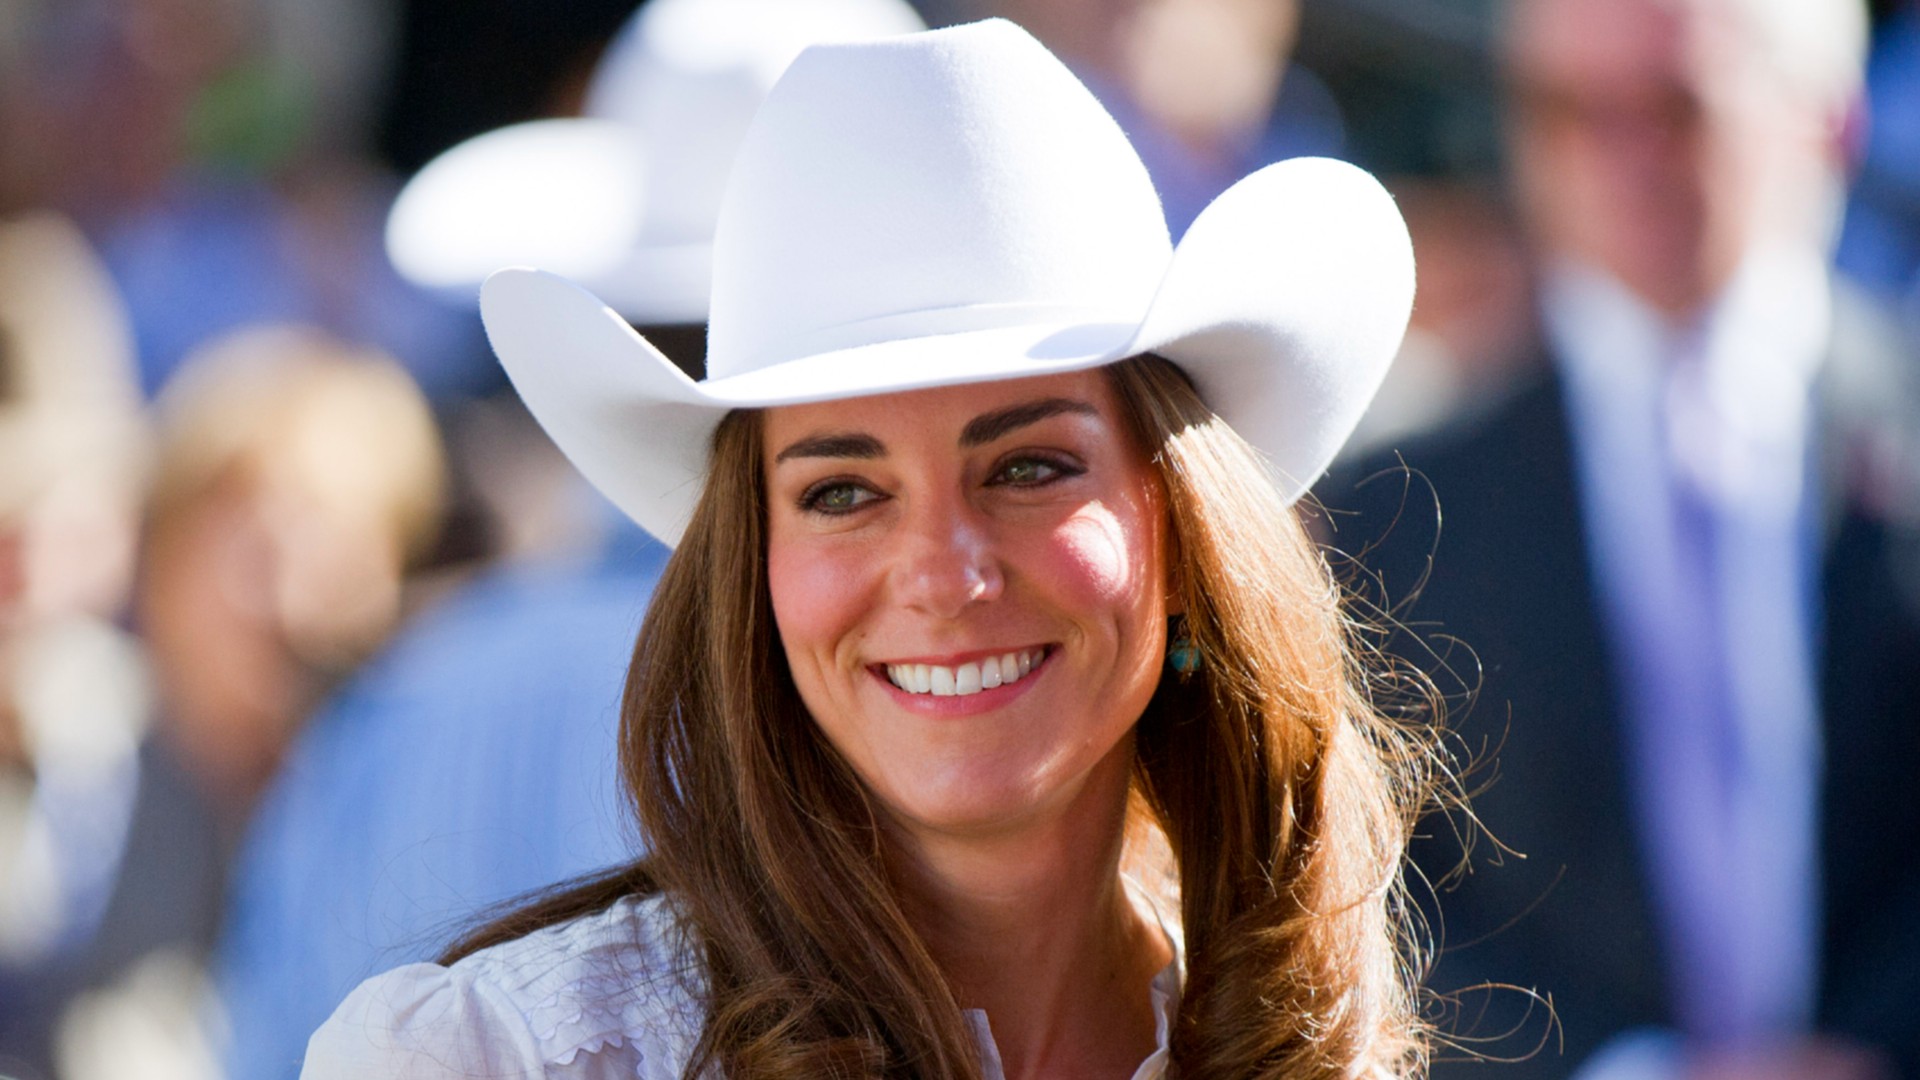 10 Times Kate Middleton Looked More Like a Commoner Than a Royal